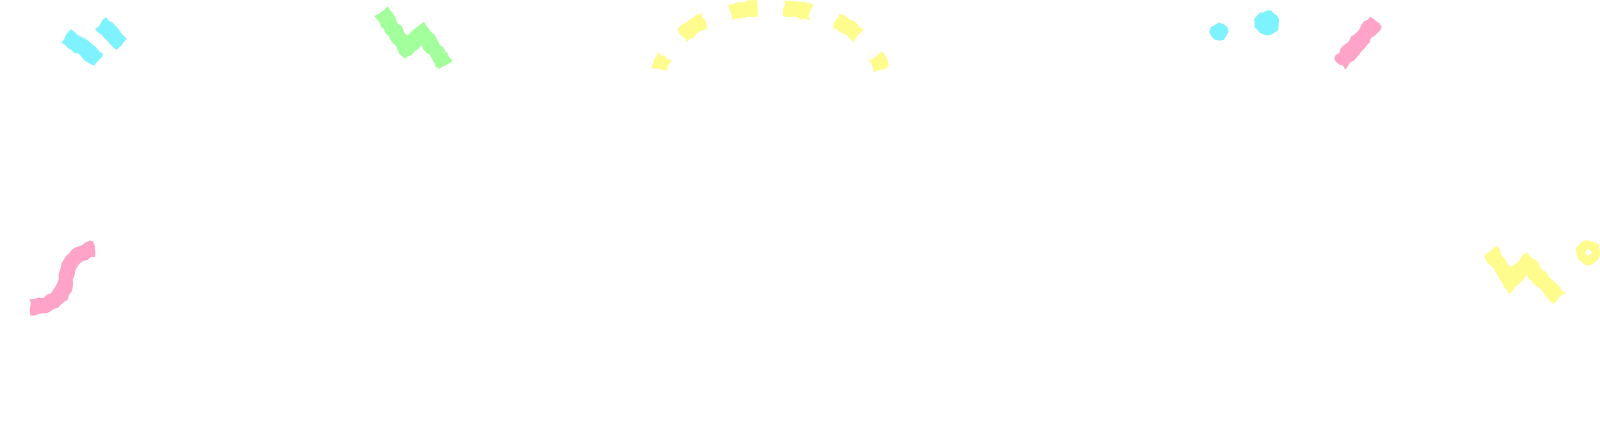 Whimsy & Wonder: A Cozy Games Collection Encore